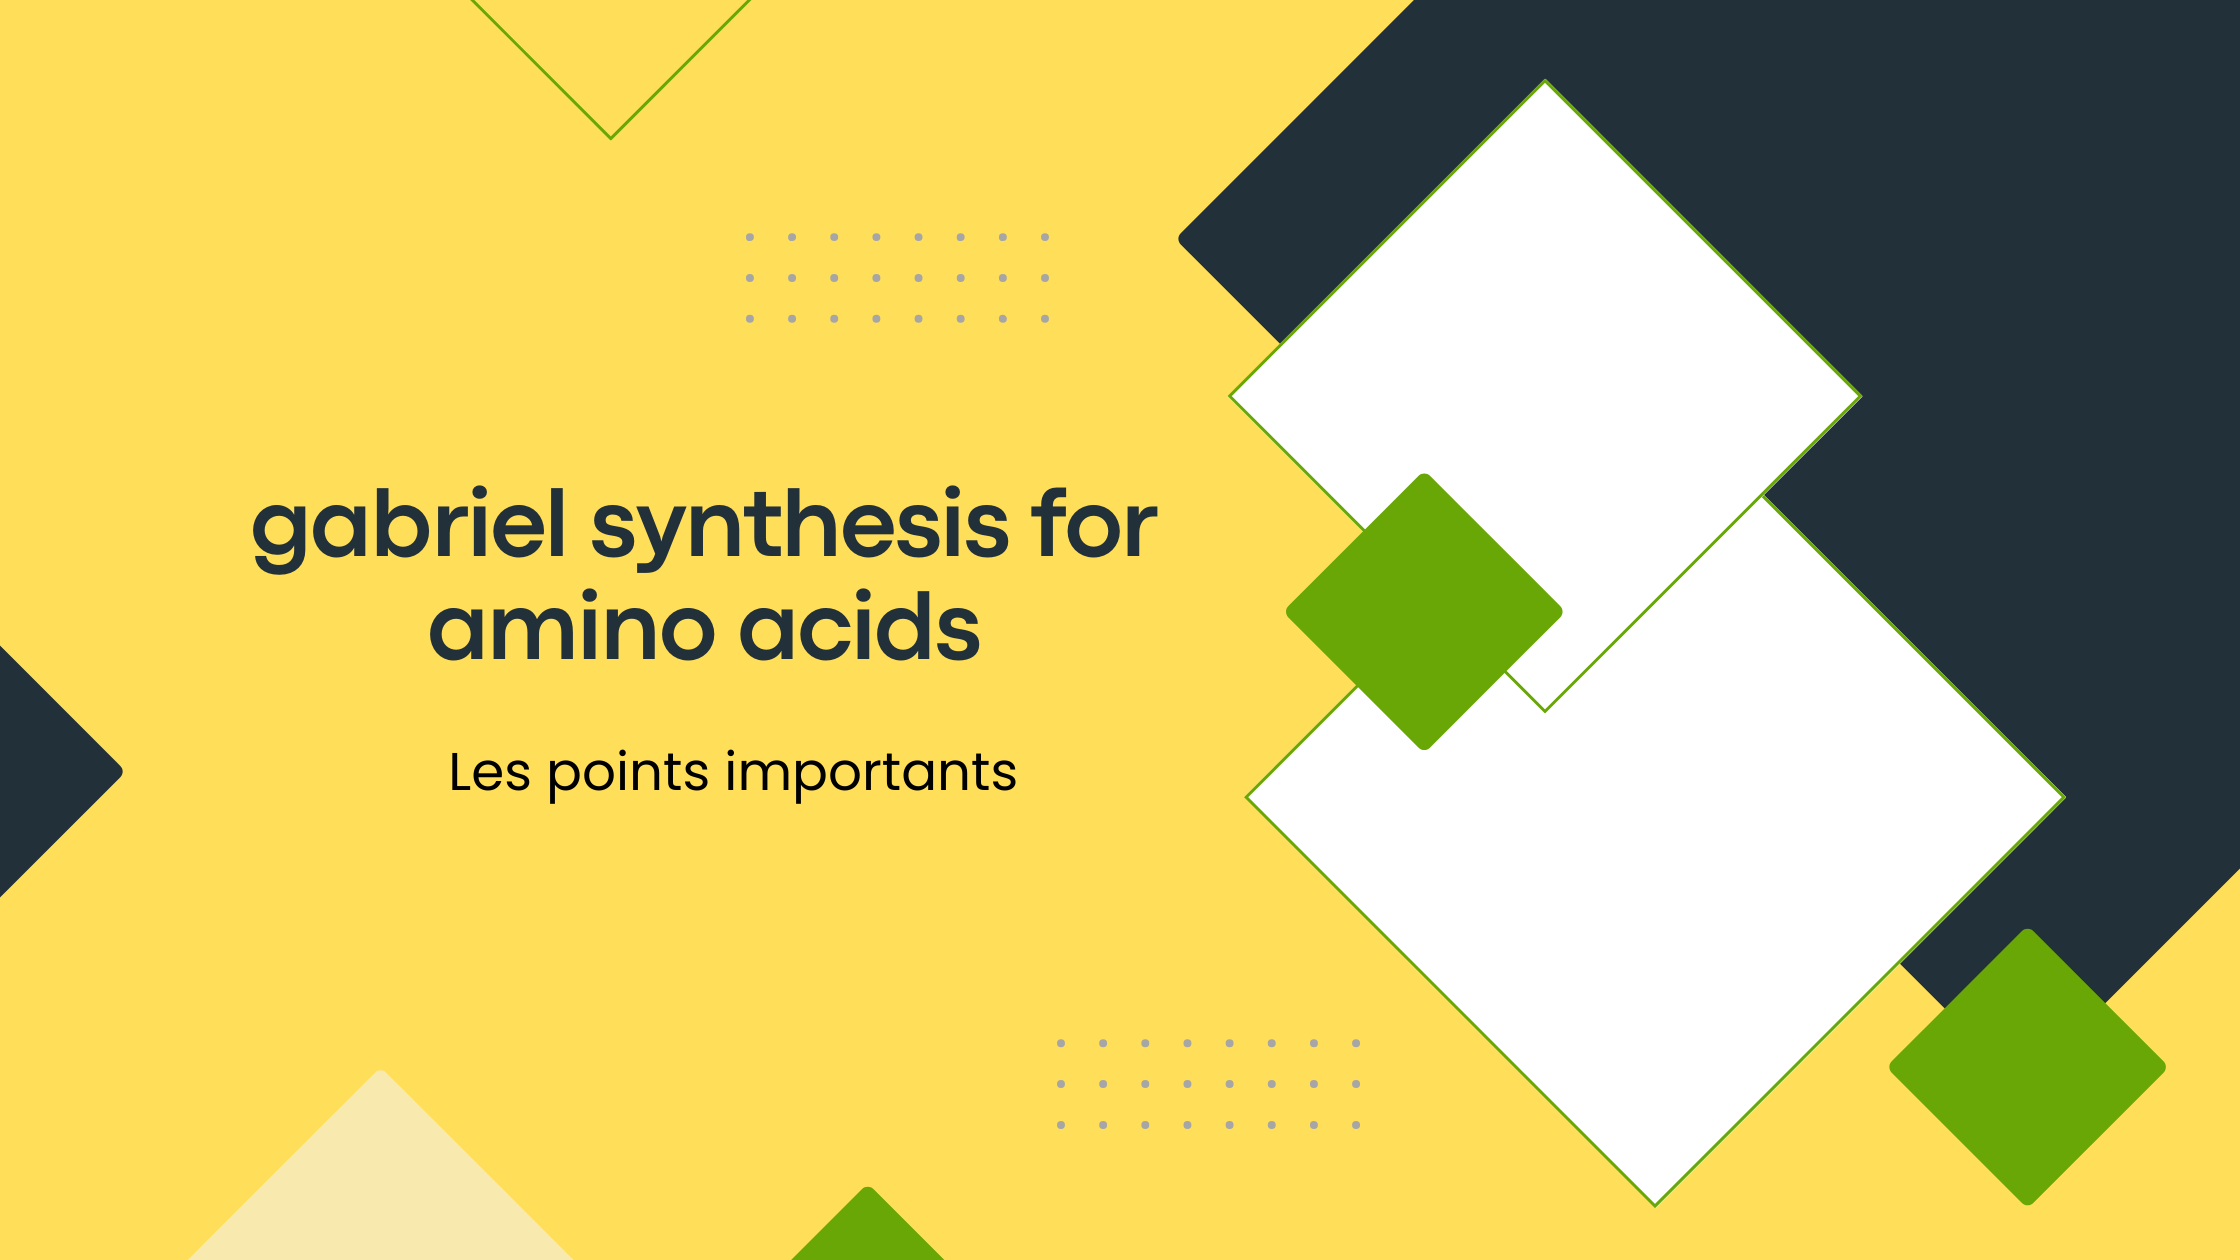 gabriel synthesis for amino acids | Les points importants